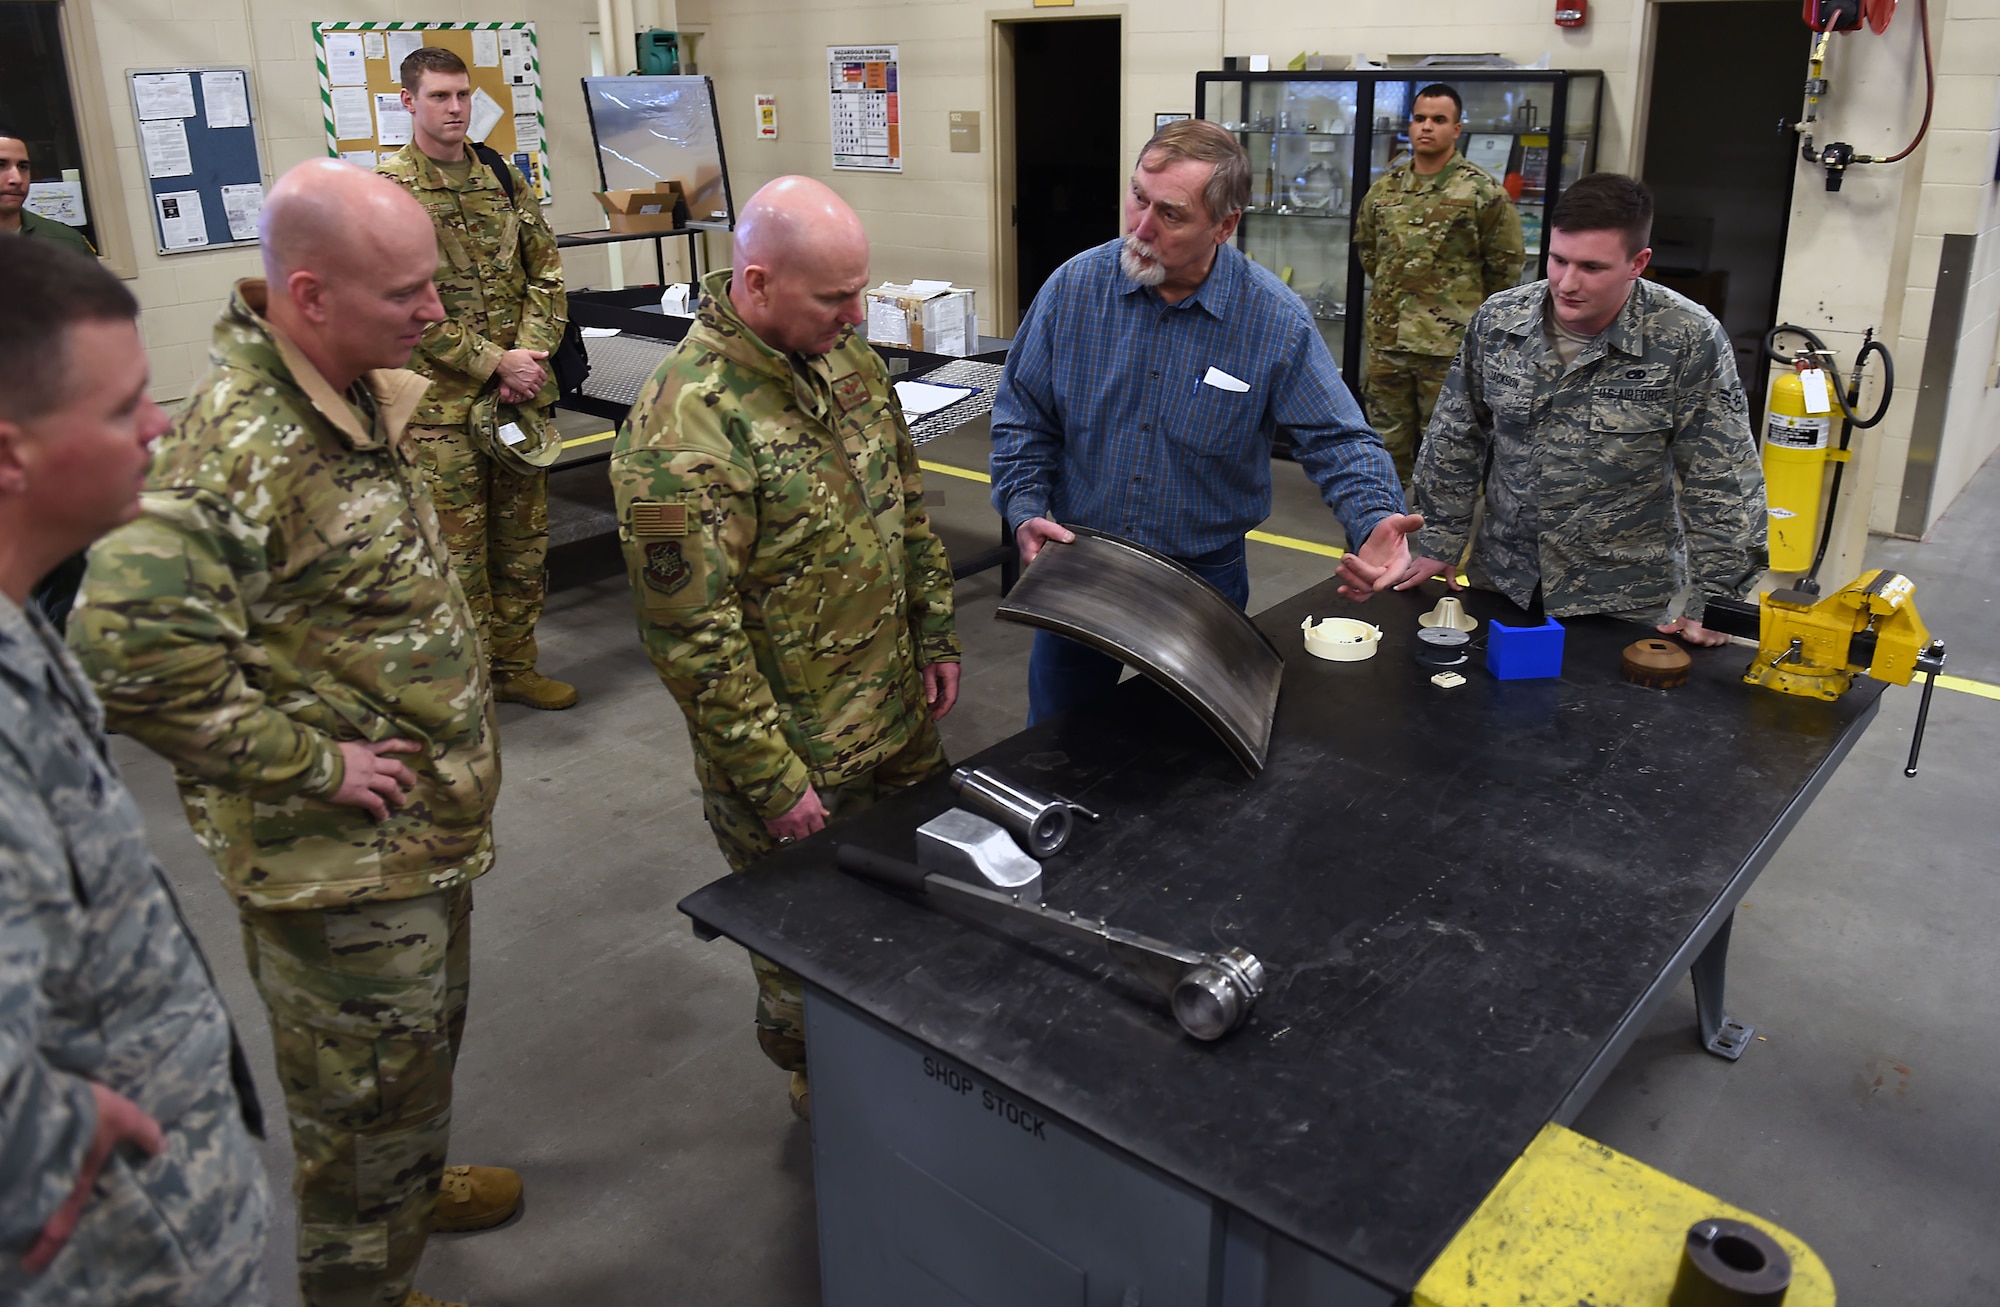 Chief Master Sgt. Chris Simpson, 18th Air Force command chief master sergeant, and Maj. Gen. Sam C. Barrett, 18th Air Force commander, are given a presentation by Will Nelson, 62nd Maintenance Squadron Metals shop foreman, on Joint Base Lewis-McChord, Wash., Feb. 21, 2019.